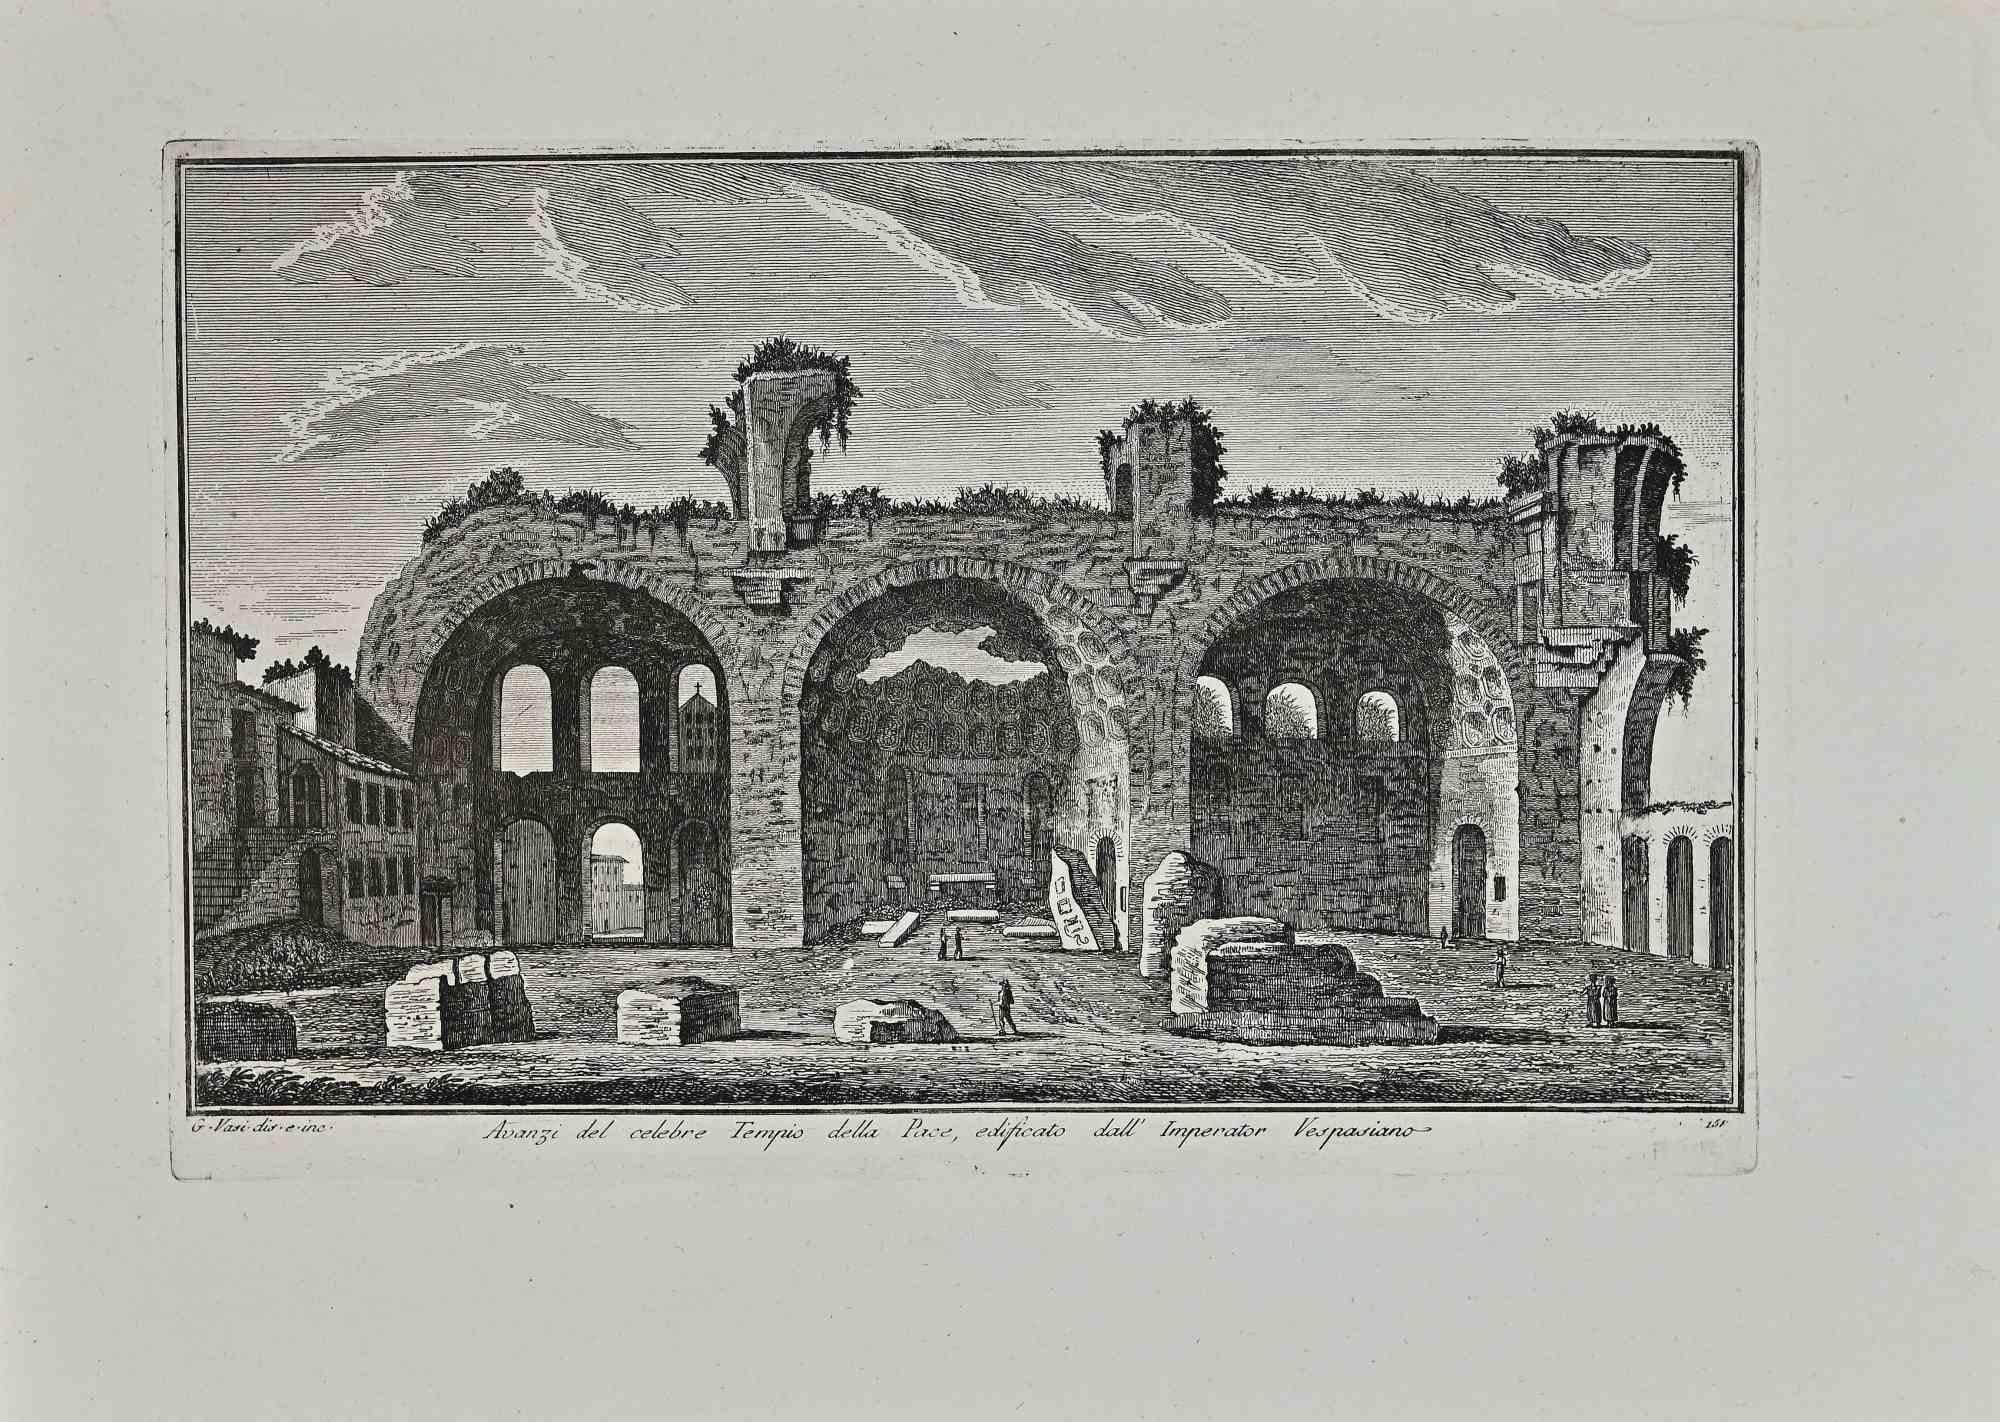 Tempio della Pace is an original etching of the Late 18th century realized by Giuseppe Vasi.

Signed and titled on plate lower margin. 

Good conditions.

Giuseppe Vasi  (Corleone,1710 - Rome, 1782) was an engraver, architect, and landscape artist.